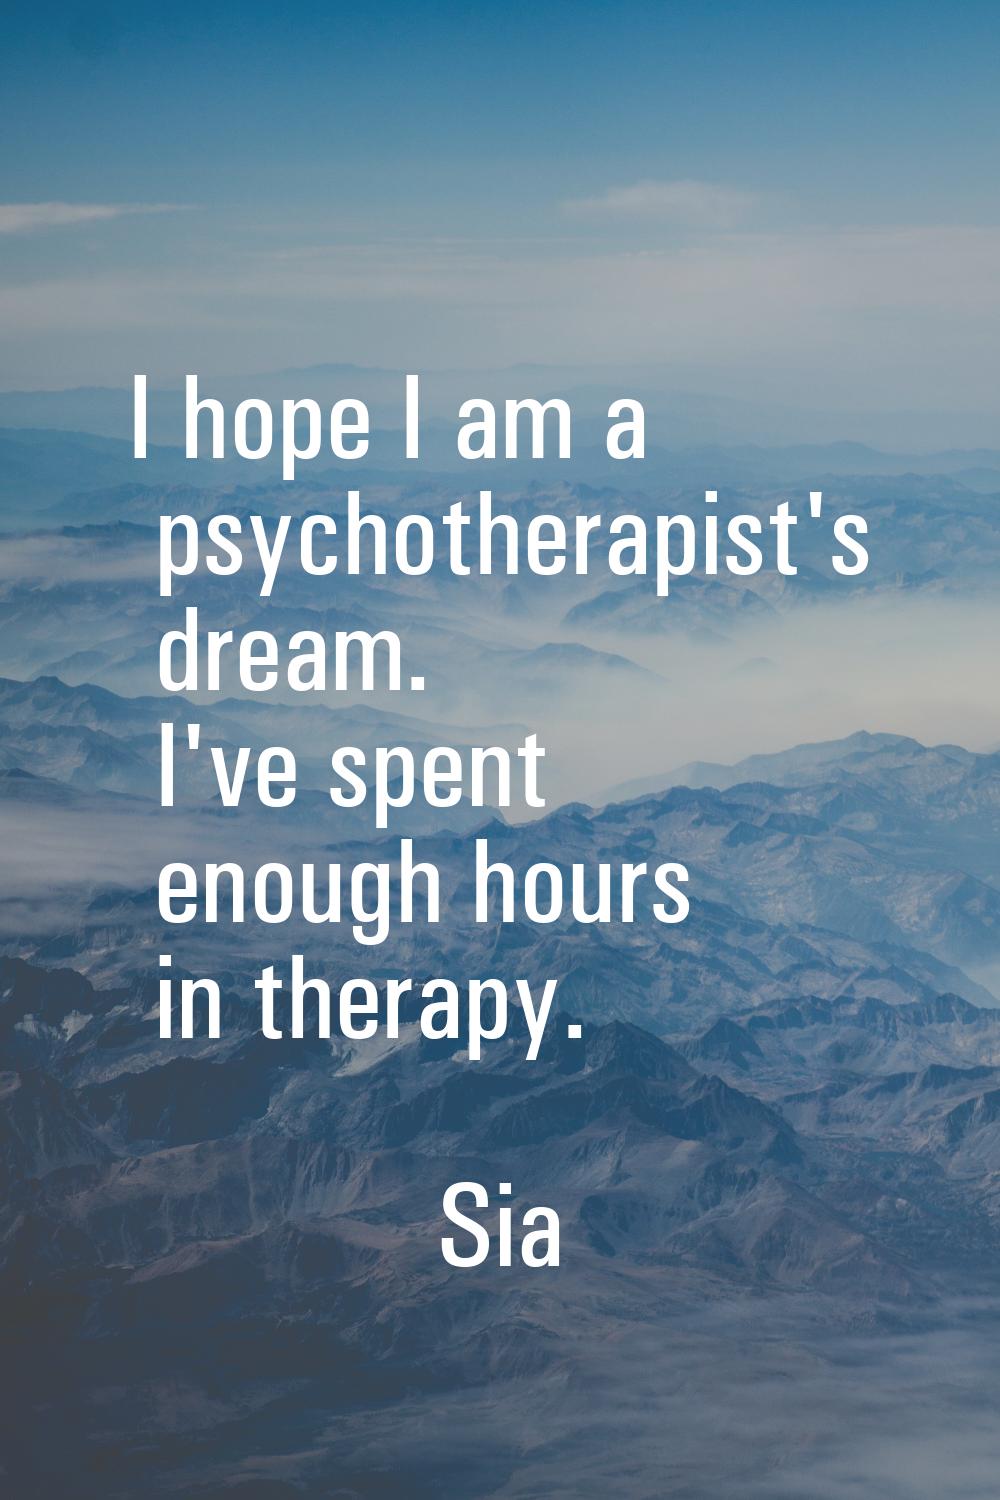 I hope I am a psychotherapist's dream. I've spent enough hours in therapy.